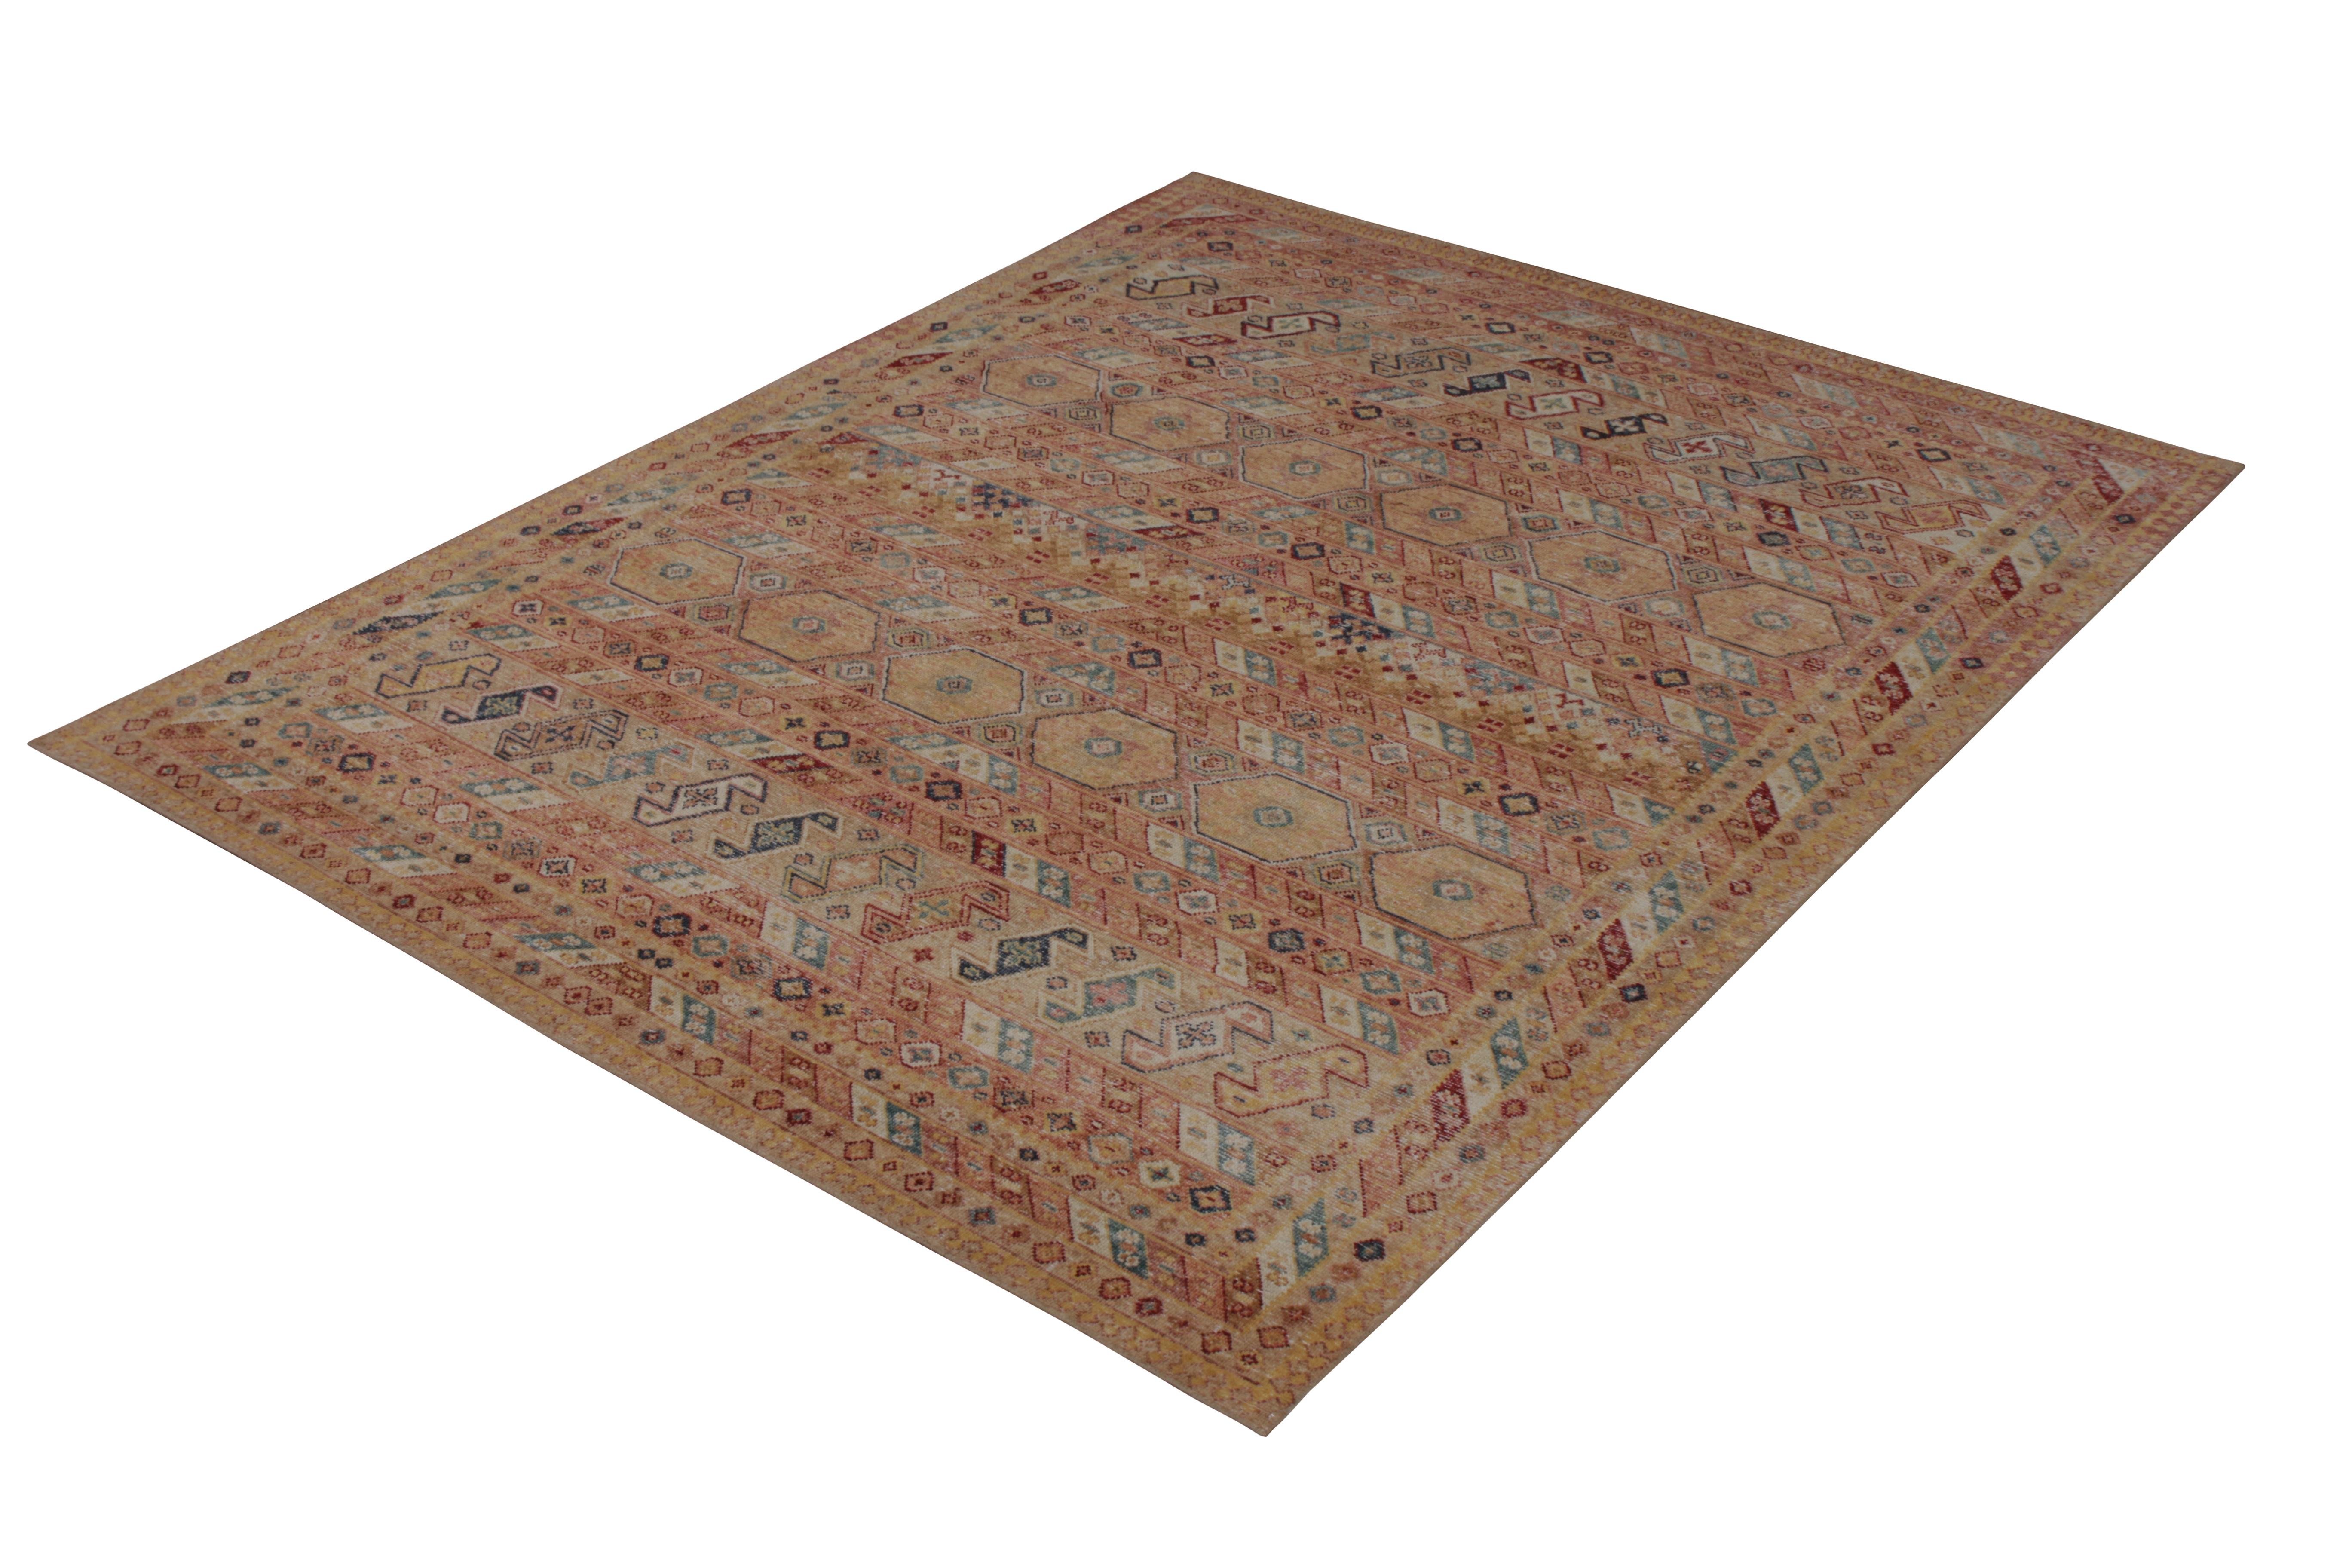 A beige-brown and red ode to classic geometric rug styles joining Rug & Kilim’s Homage Collection. Hand-knotted in wool, this 8 x 10 exemplifies the distressed style and texture achieved in this line’s comfortable wash. Easy to maintain, further